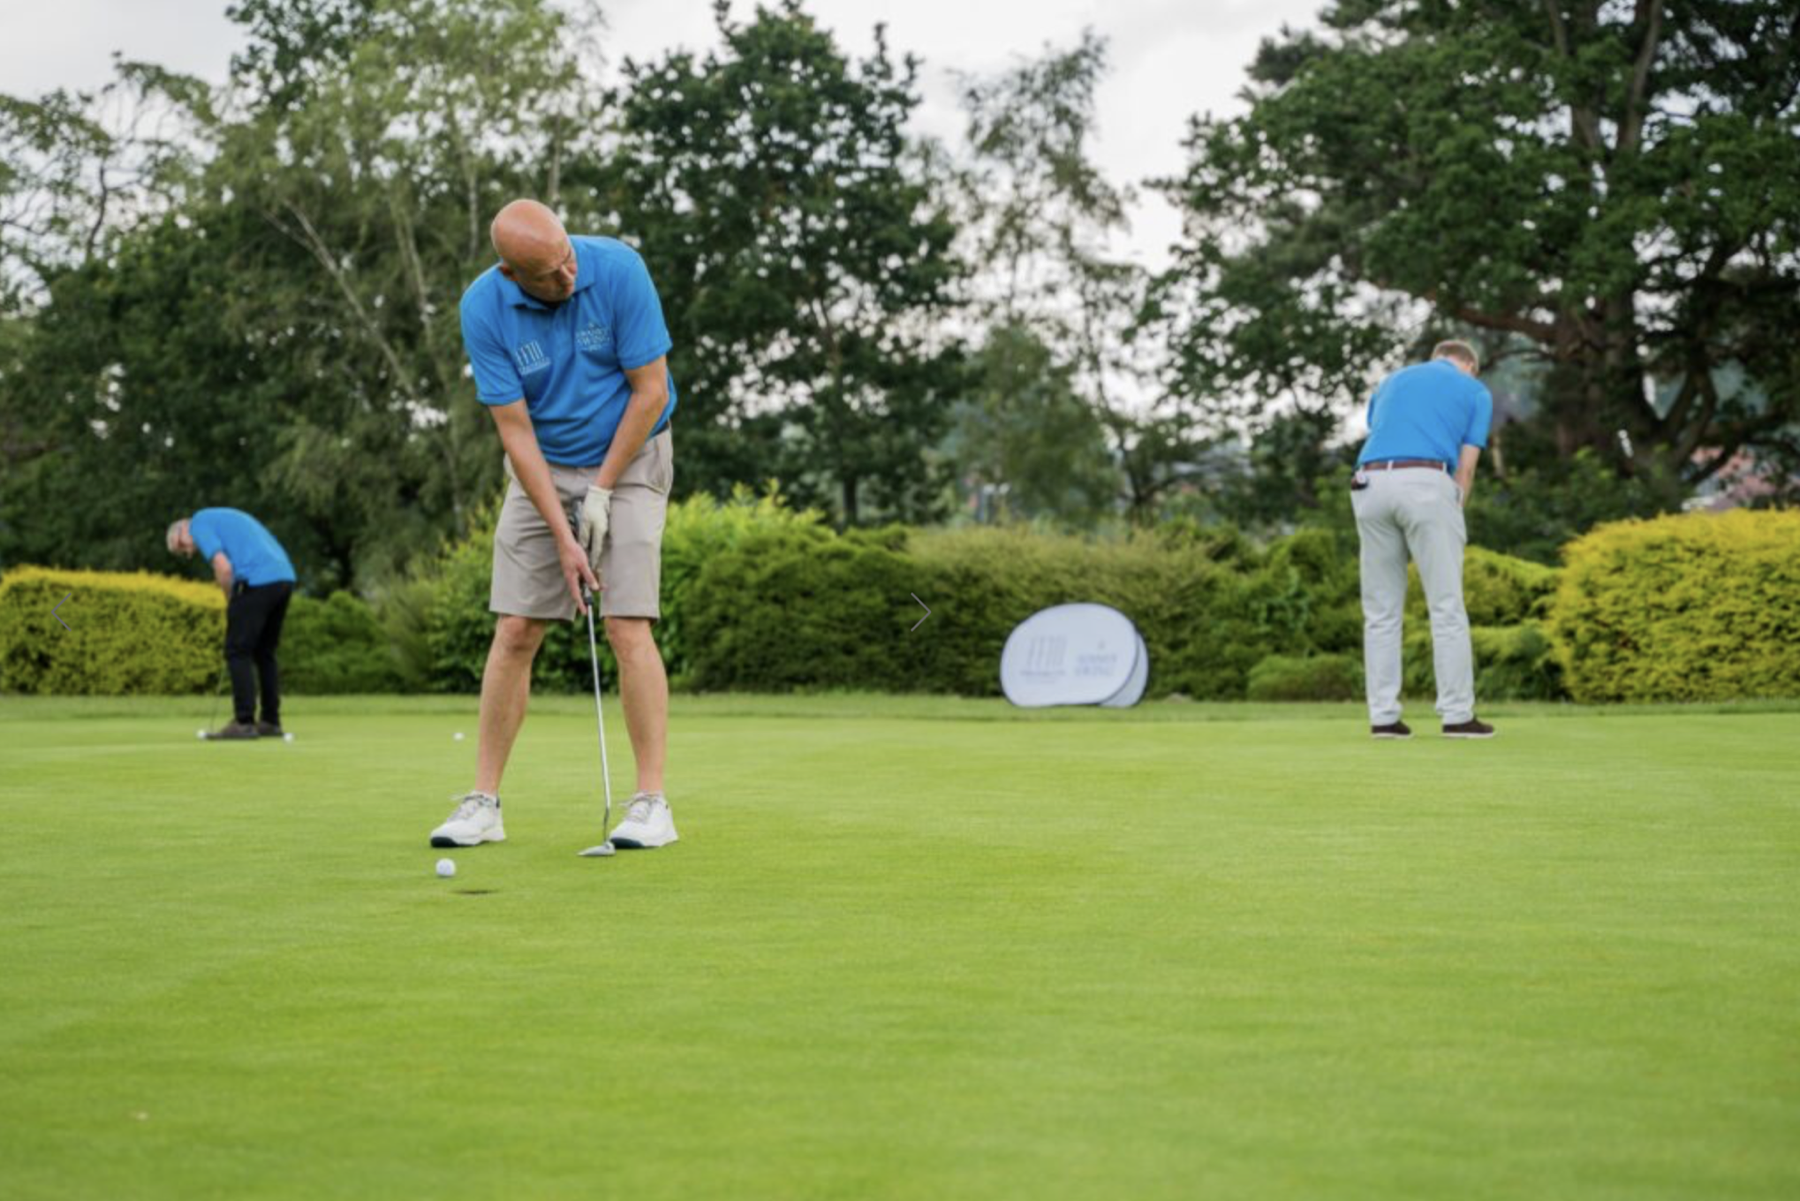  Swanky Swing golfers perfect their putting stroke on the putting green at The Mere Golf Resort and Spa 